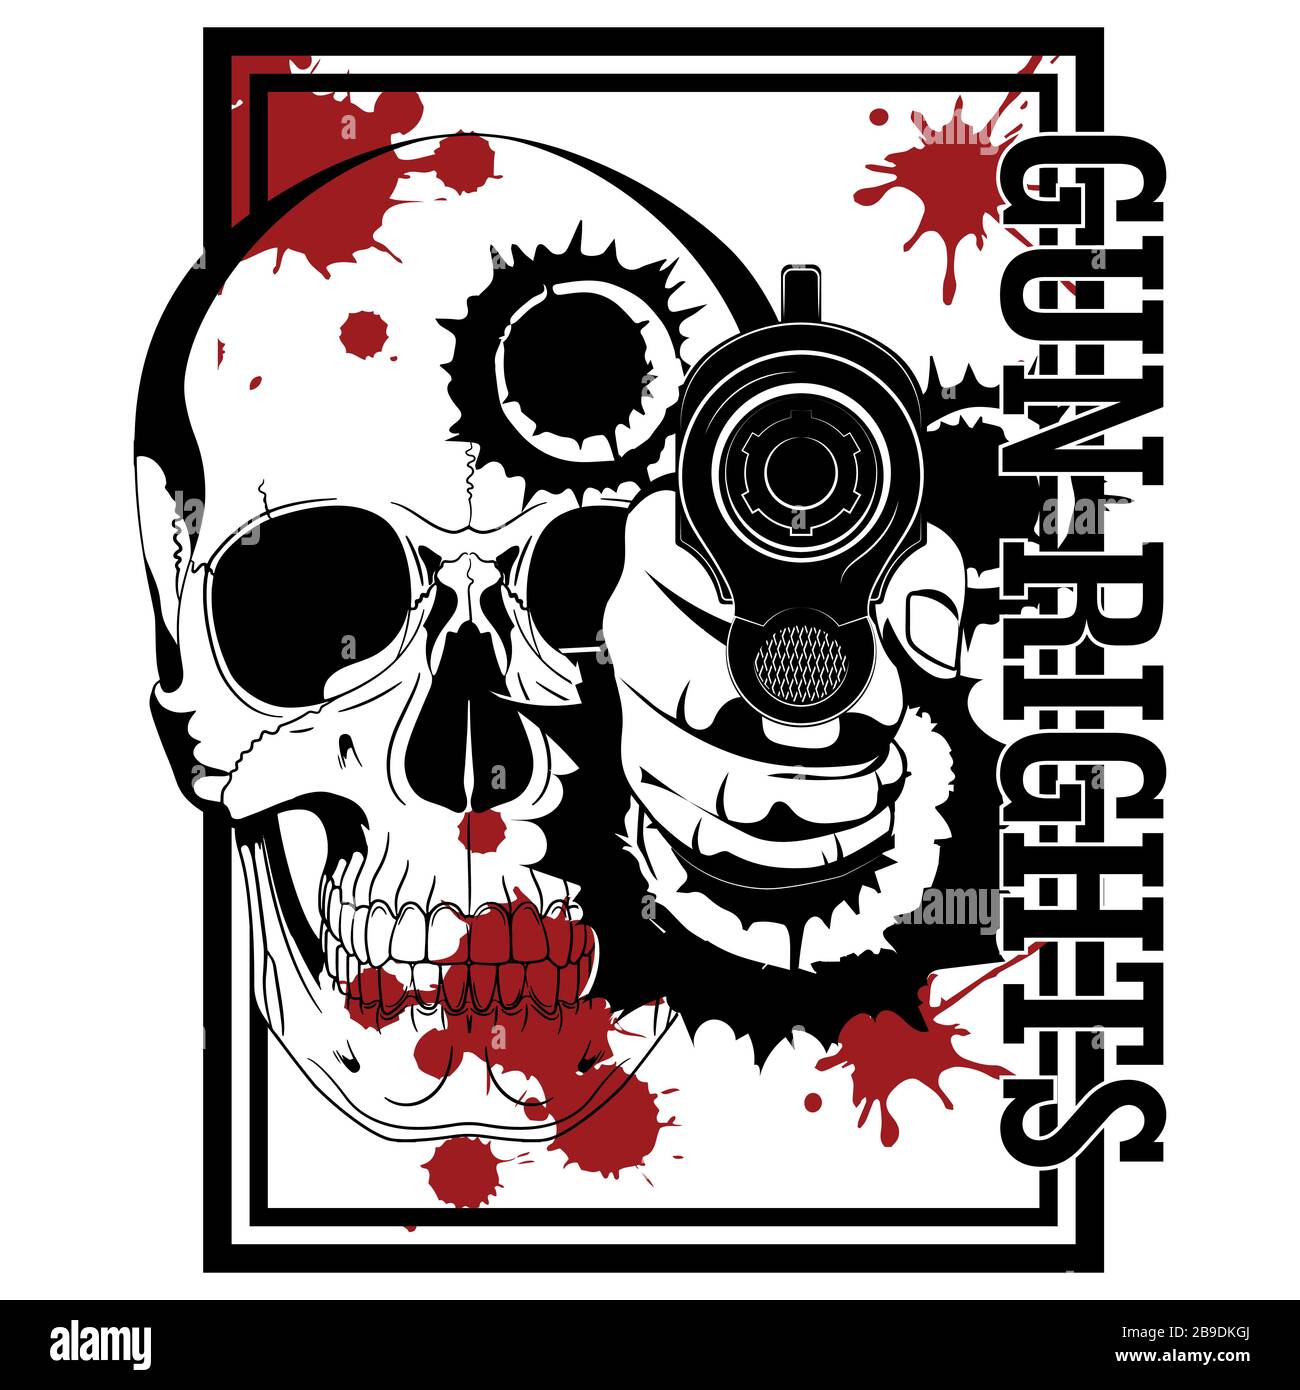 Design with firearms. Hand with gun, human skull, blood and bullet holes Stock Vector